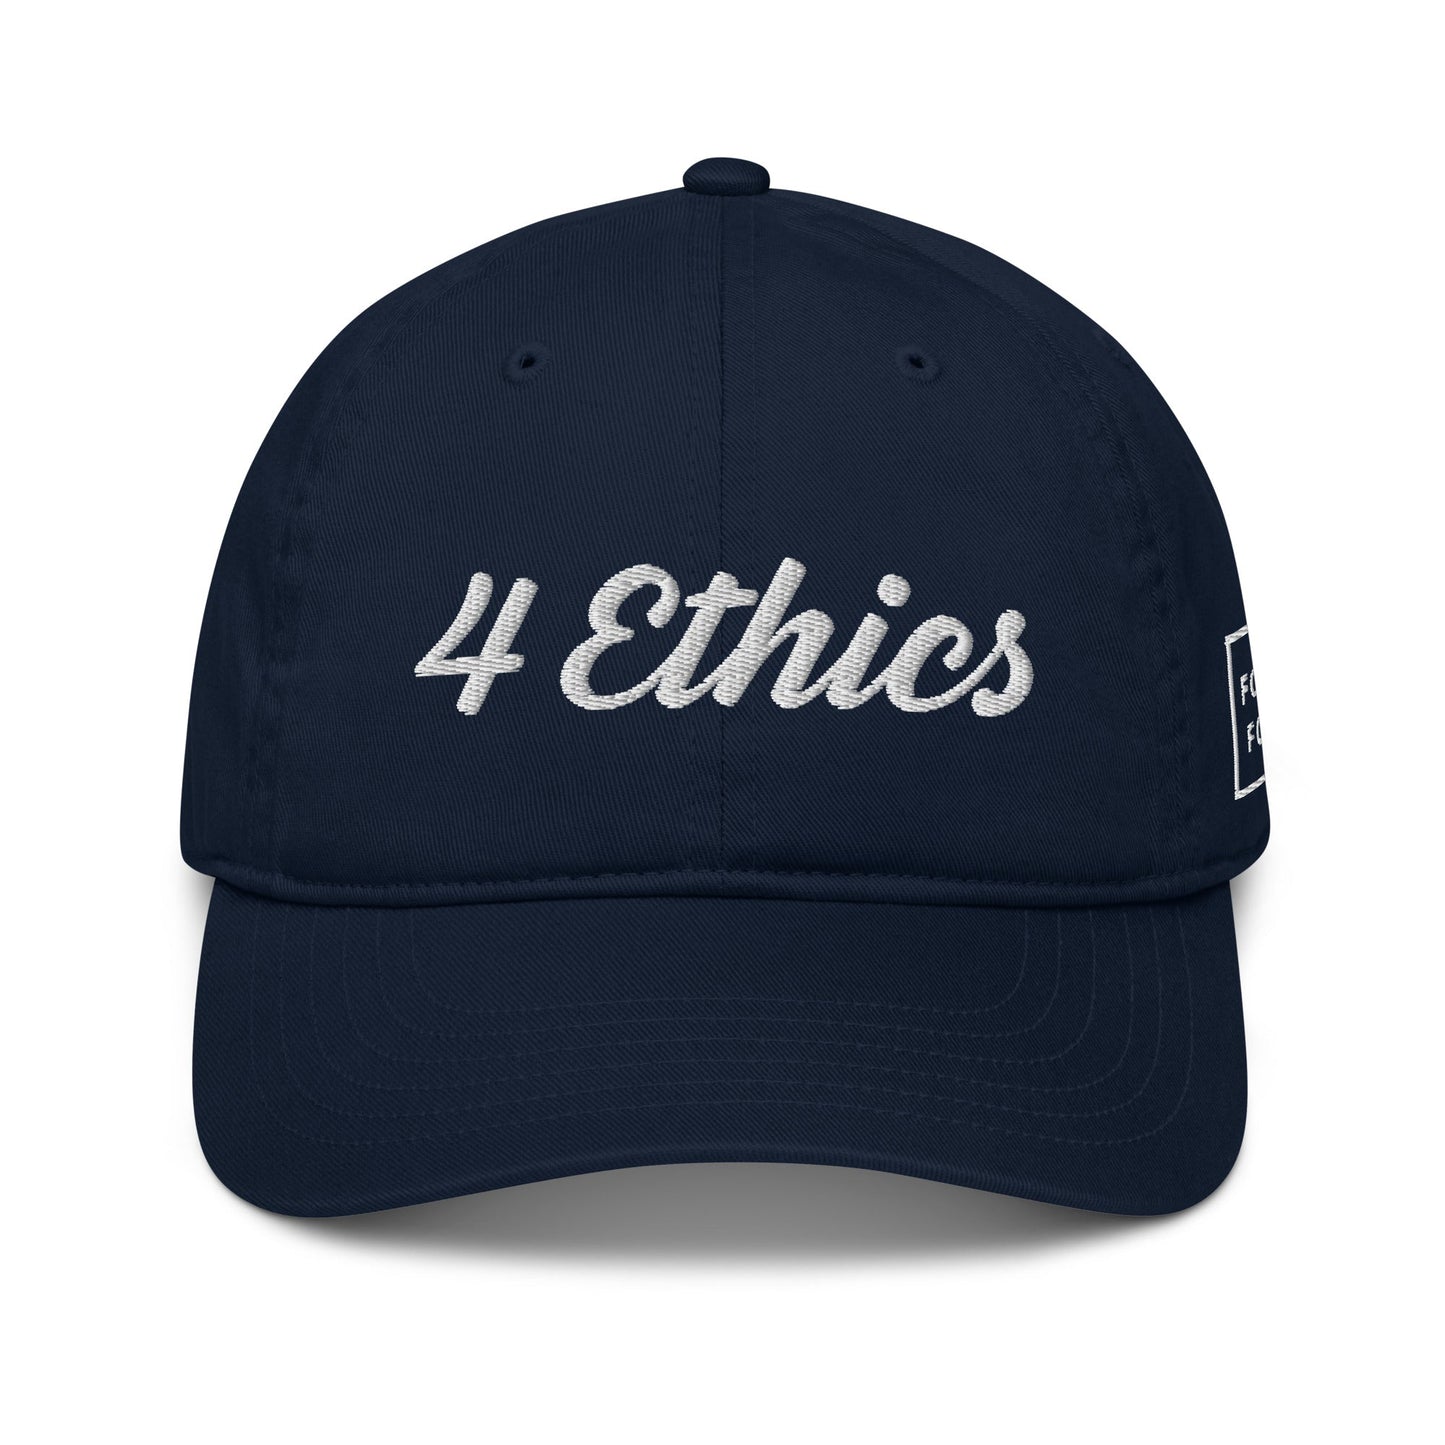 4 Ethics Organic Hat - For Health For Ethics - Pacific - Front